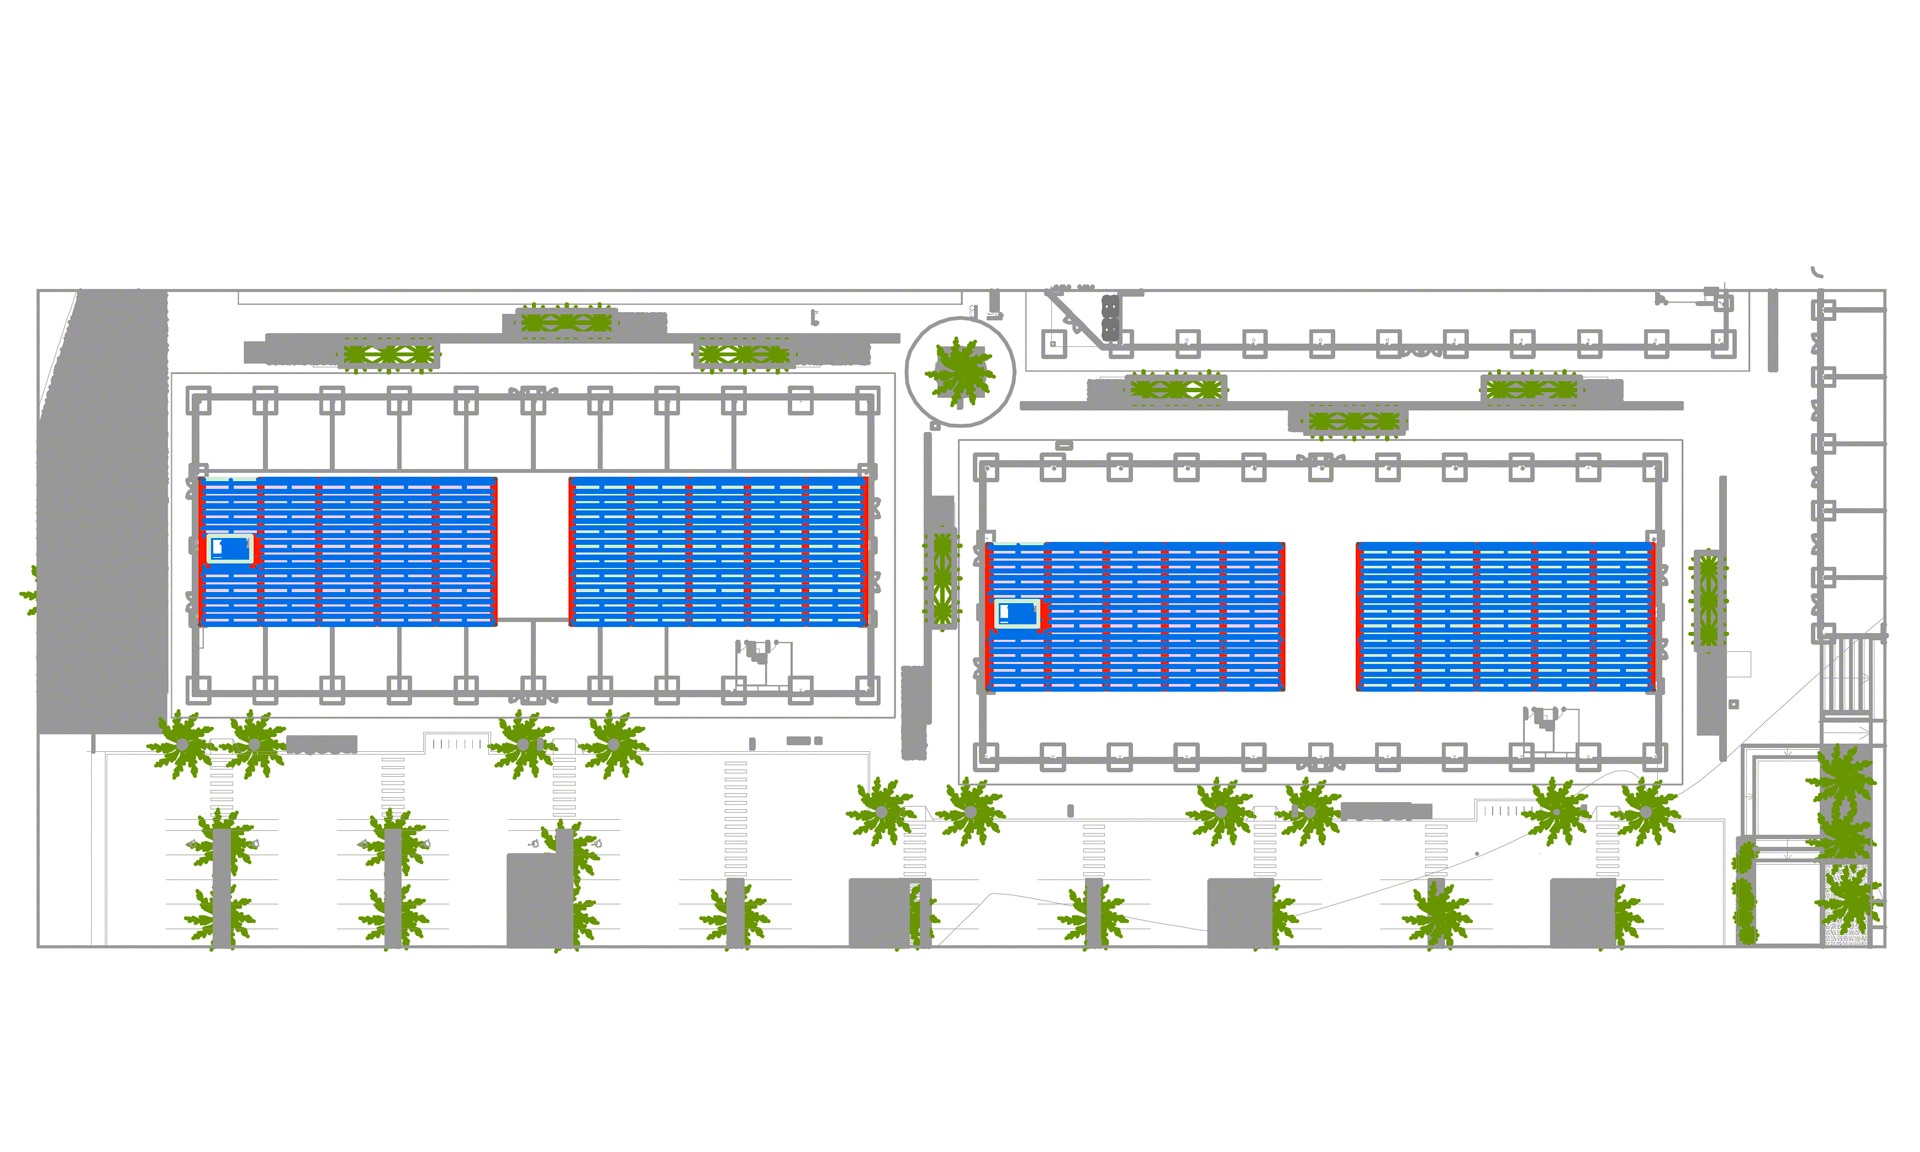 It is a solution that optimises the storage space at Almenara Mall